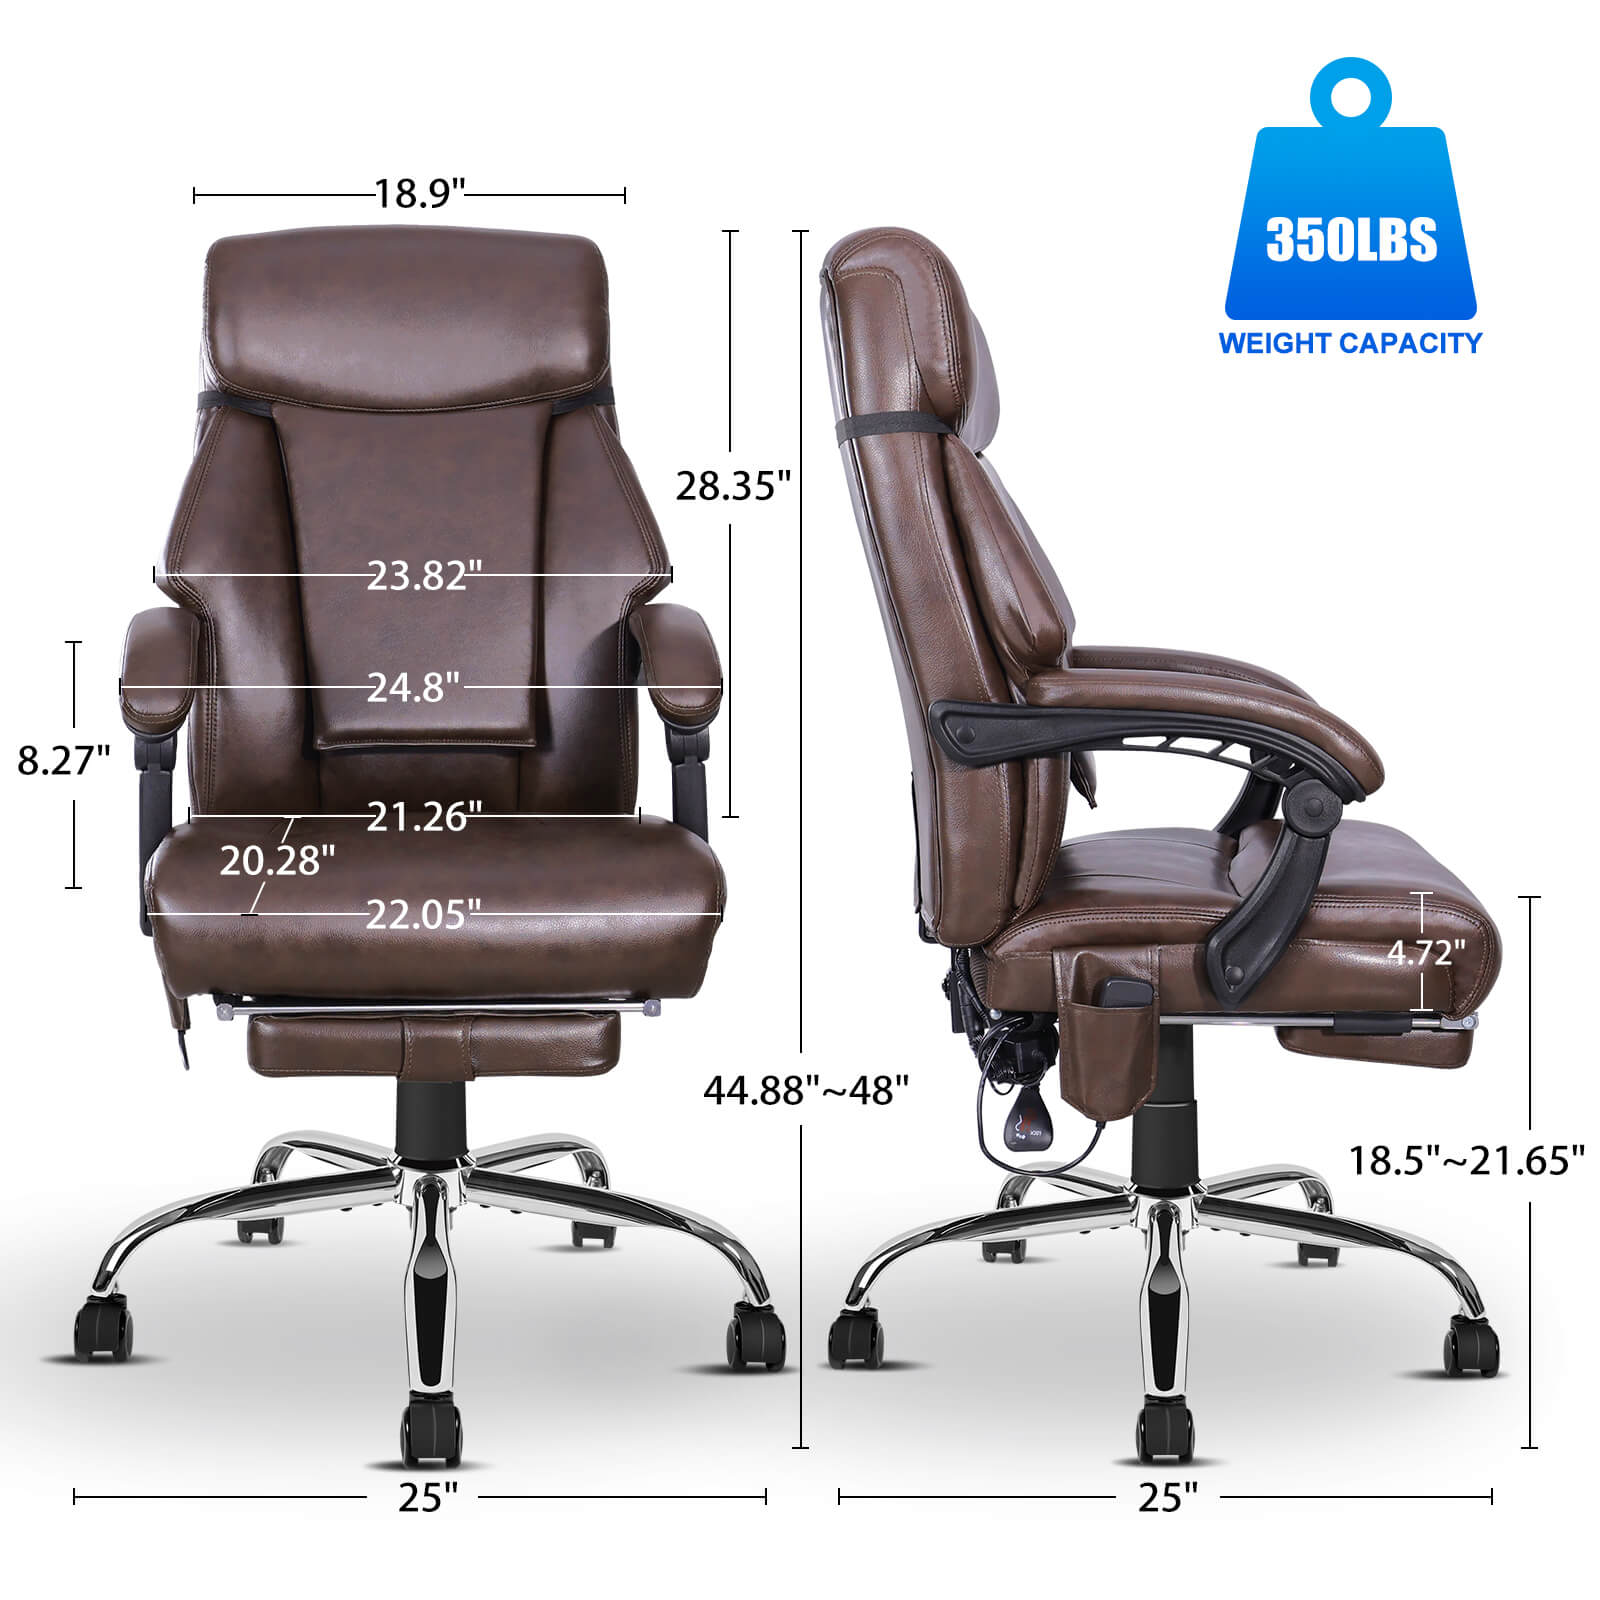 Kneading Massage Office Chair with Heating, Infinite Reclining Backrest, Retractable Footrest & Back Cushion, Brown